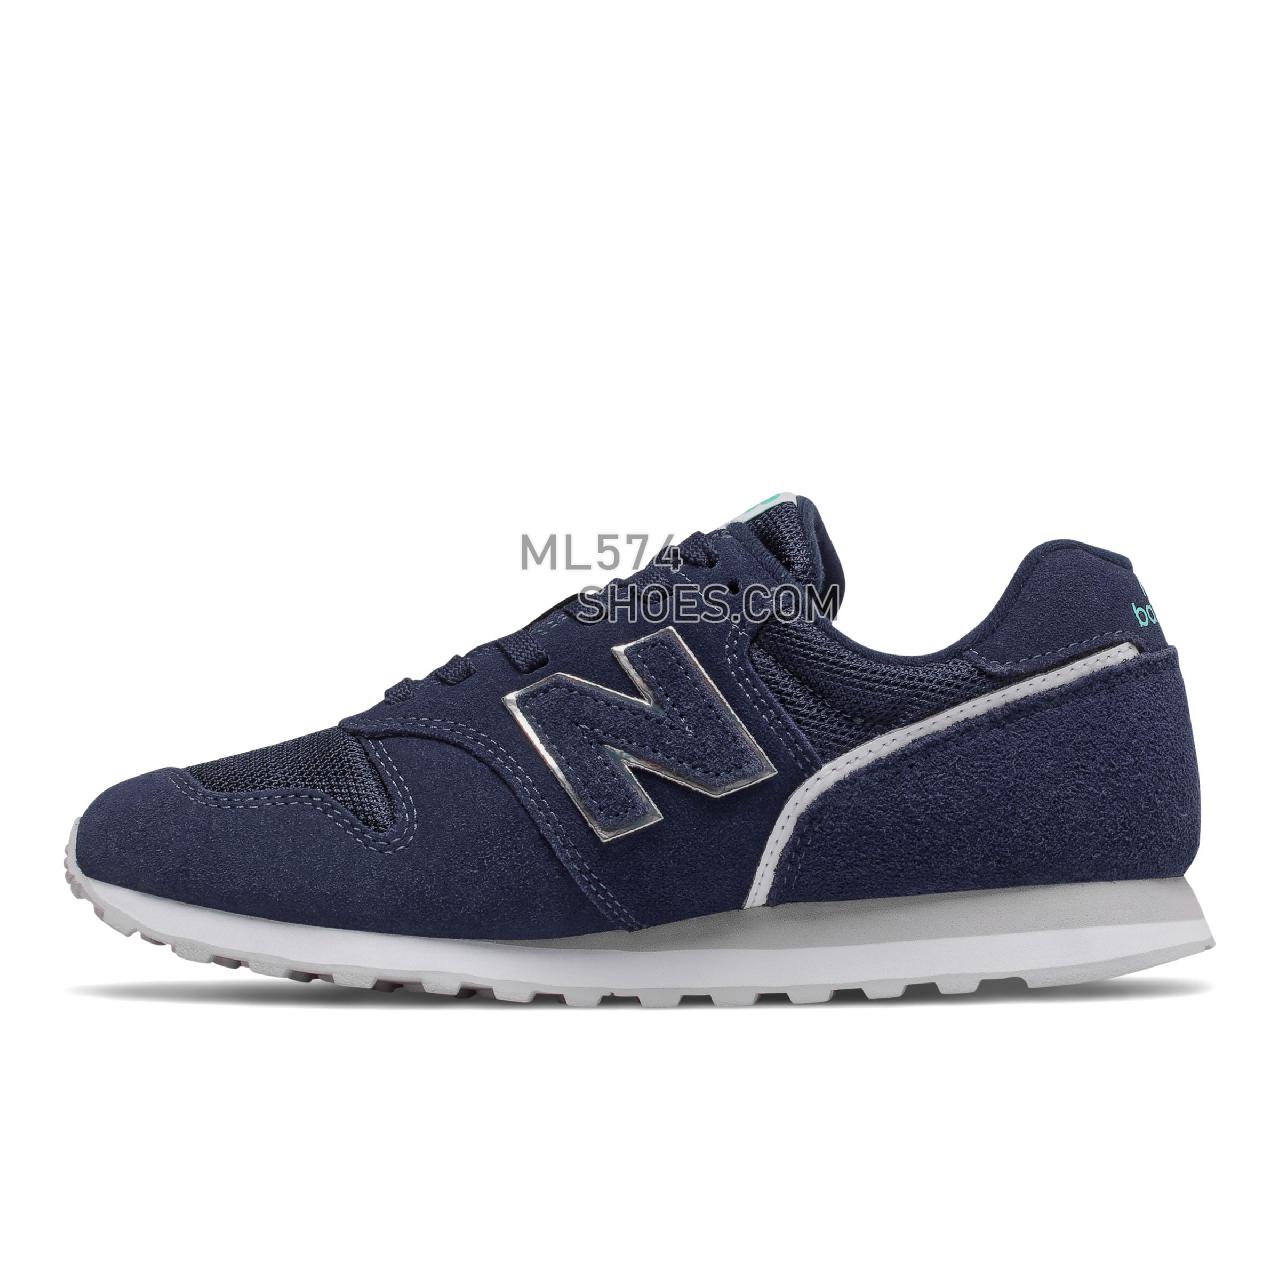 New Balance WL373 - Women's Classic Sneakers - Pigment with White - WL373FS2